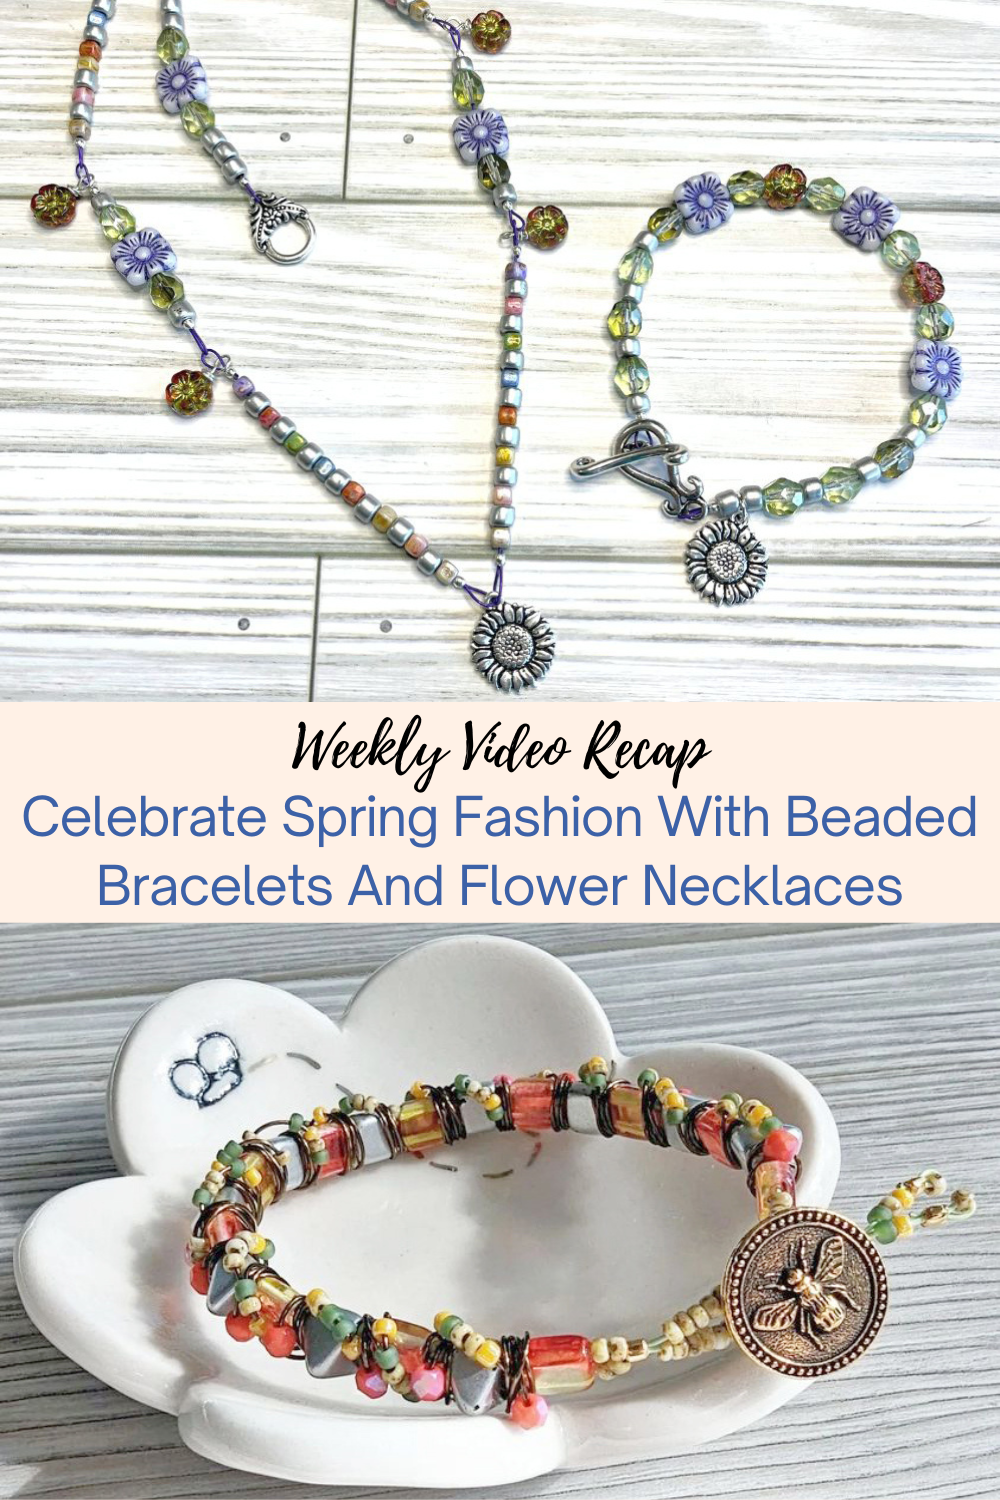 Celebrate Spring Fashion With Beaded Bracelets And Flower Necklaces Collage